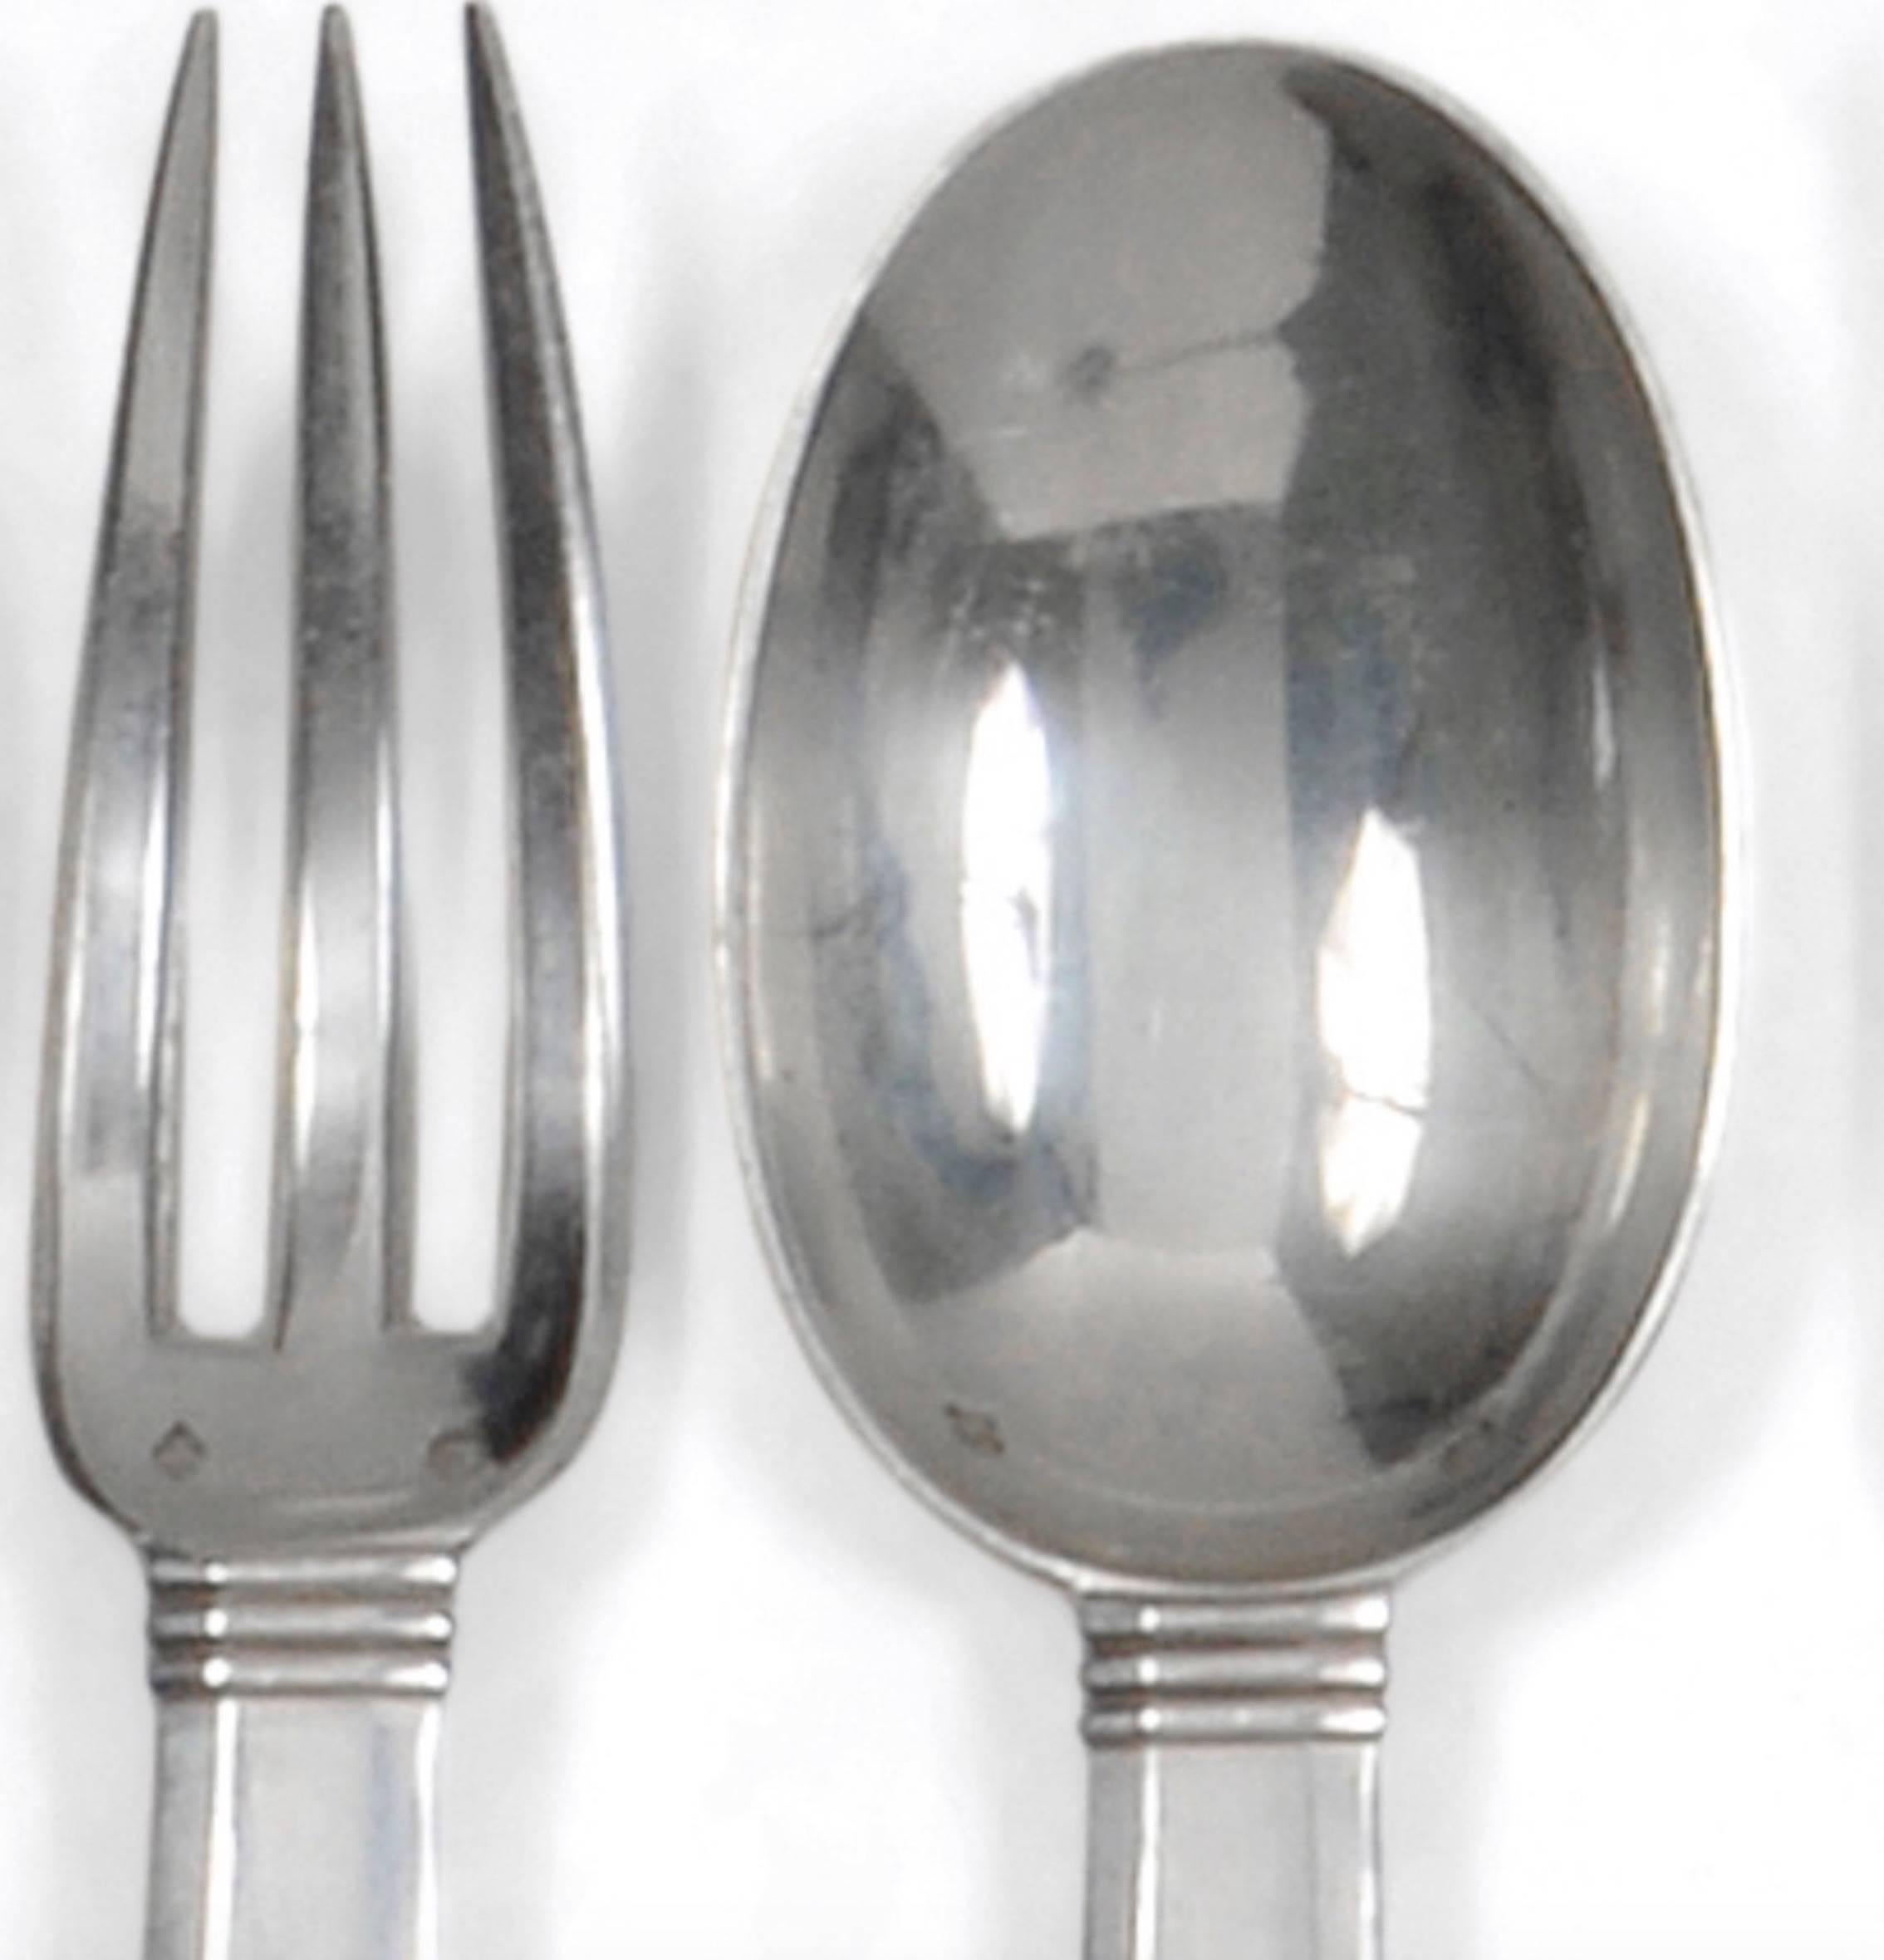 Designed in 1924 by Jean Puiforcat, this flatware has great formal purity. Its volumes interact as though it were a sterling silver sculpture.
This family cutler, founded in Paris in 1820 by Emile Puiforcat owes most of its renown to Jean Puiforcat